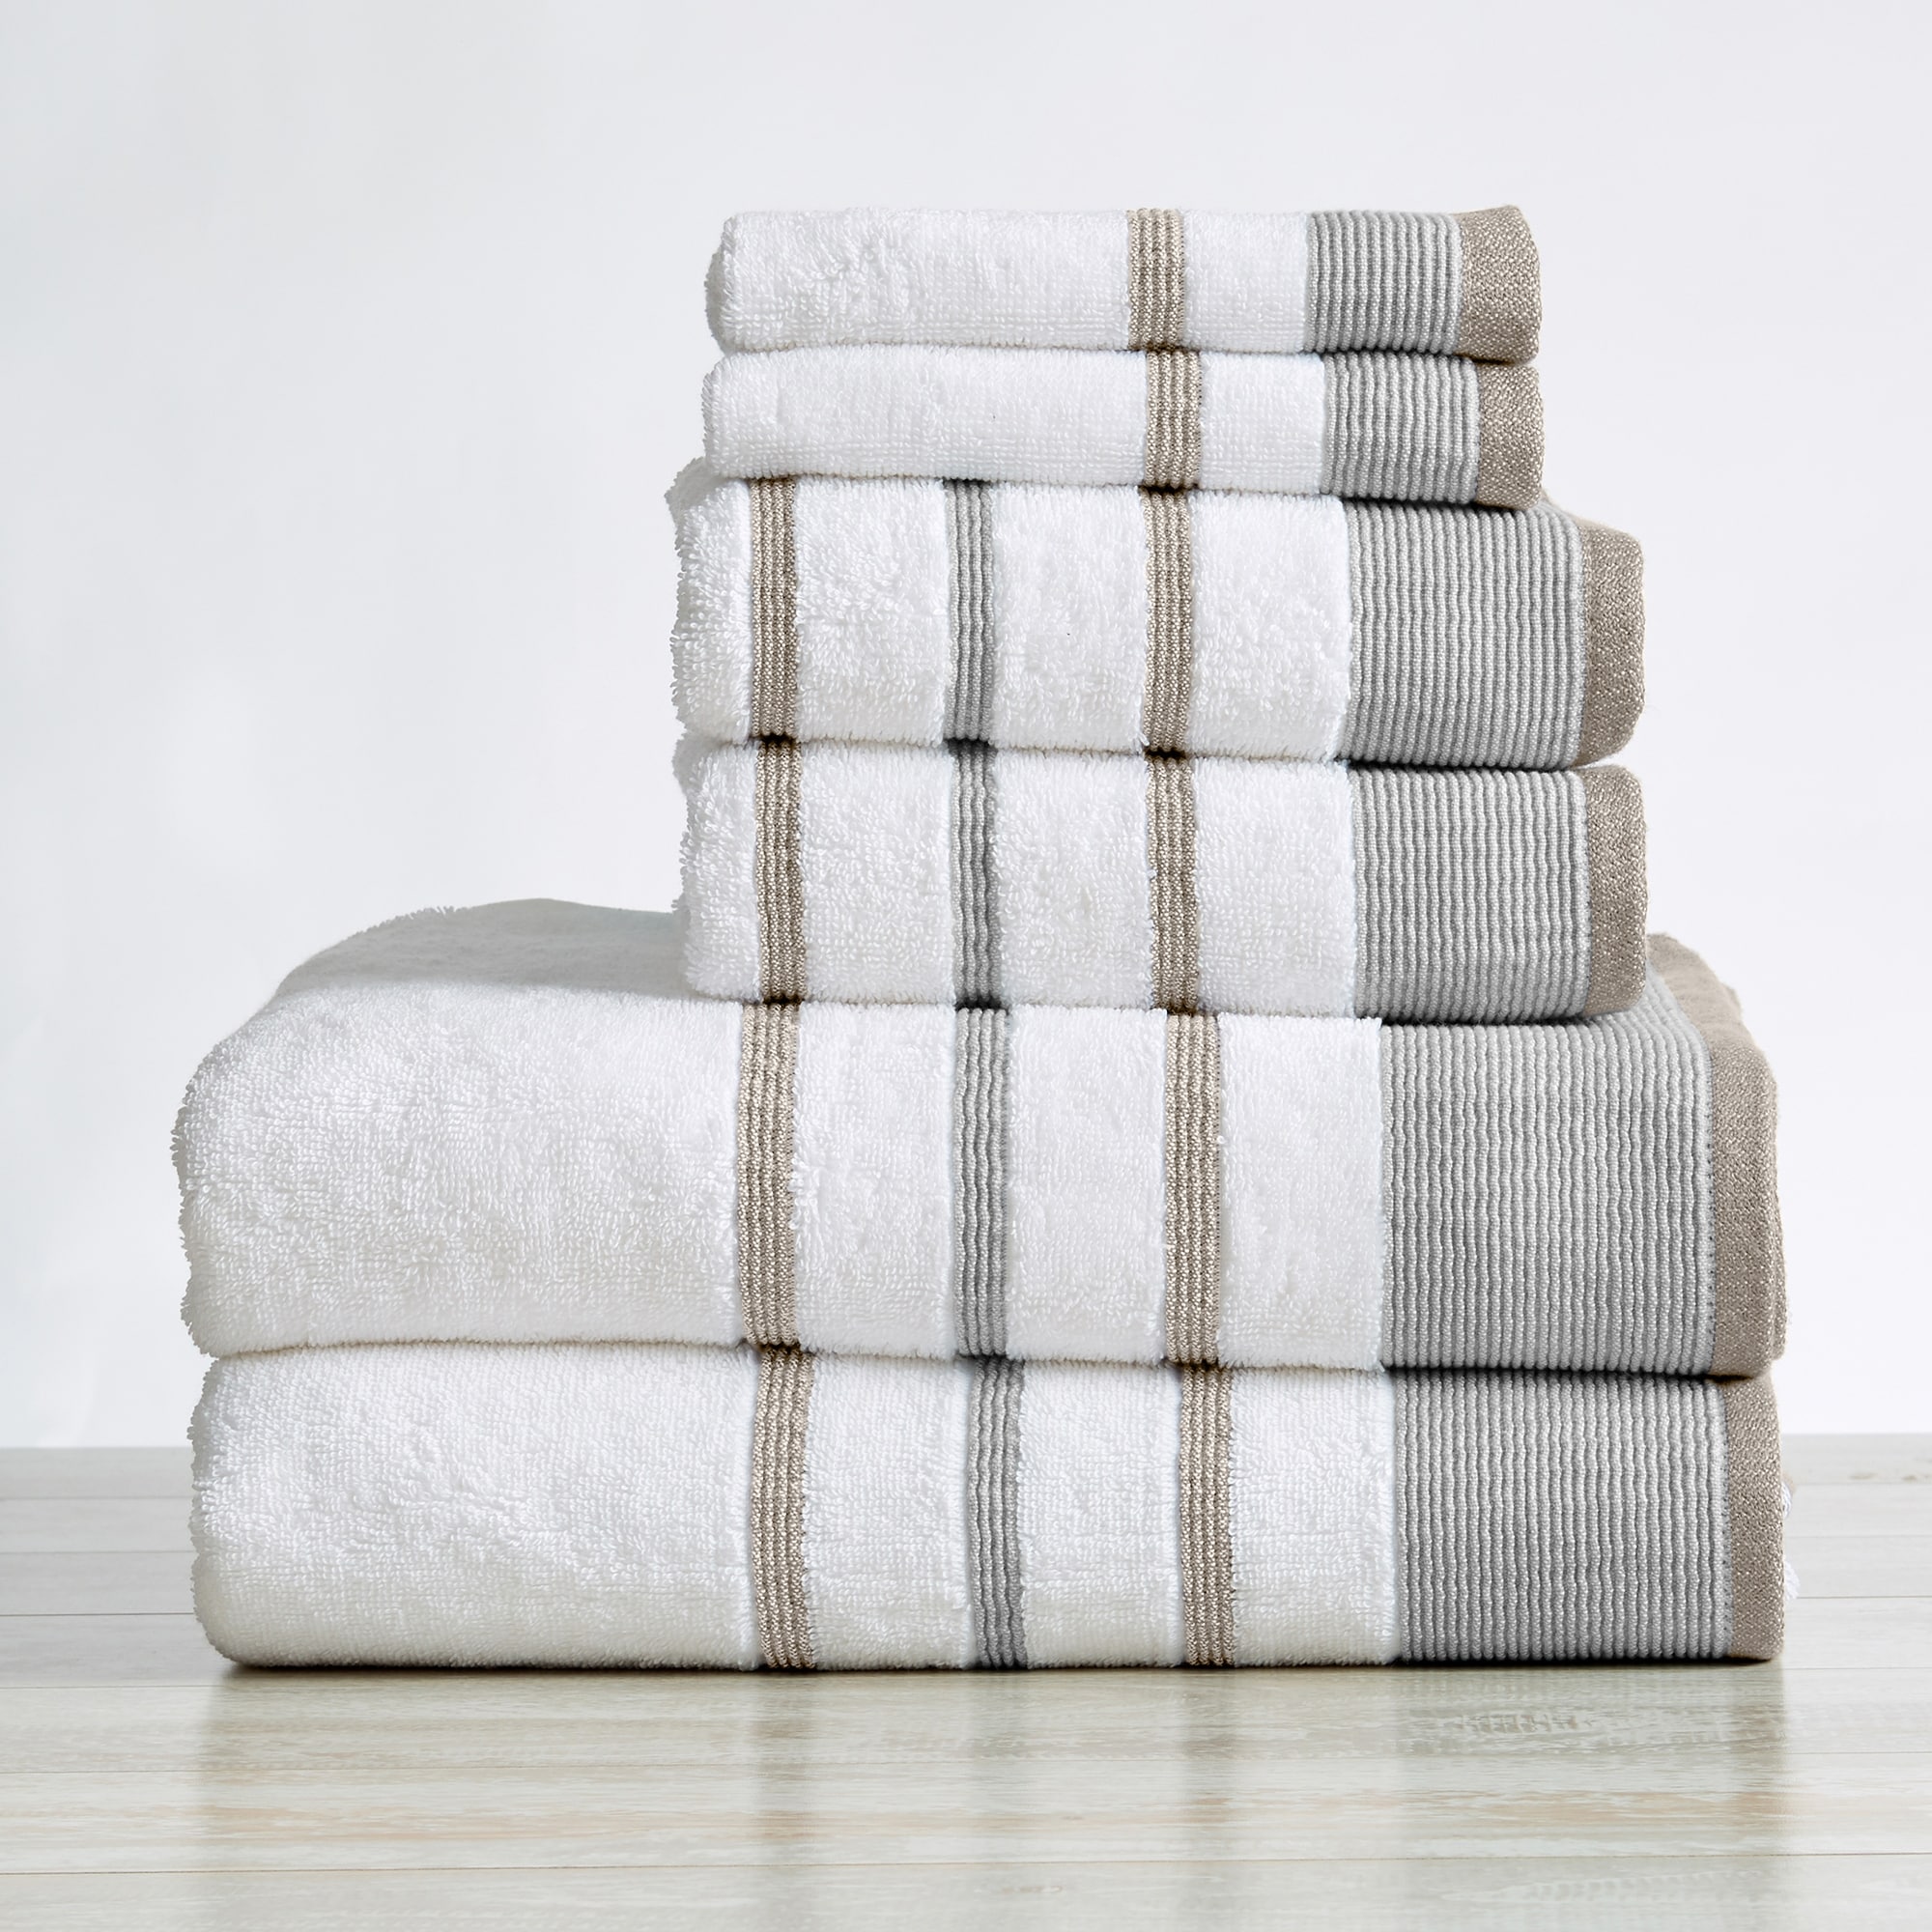 https://ak1.ostkcdn.com/images/products/is/images/direct/80c2b91a6eba3c0b2aa6d535d72304777c0a0d50/Great-Bay-Home-Turkish-Cotton-Striped-Bath-Towel-Sets.jpg